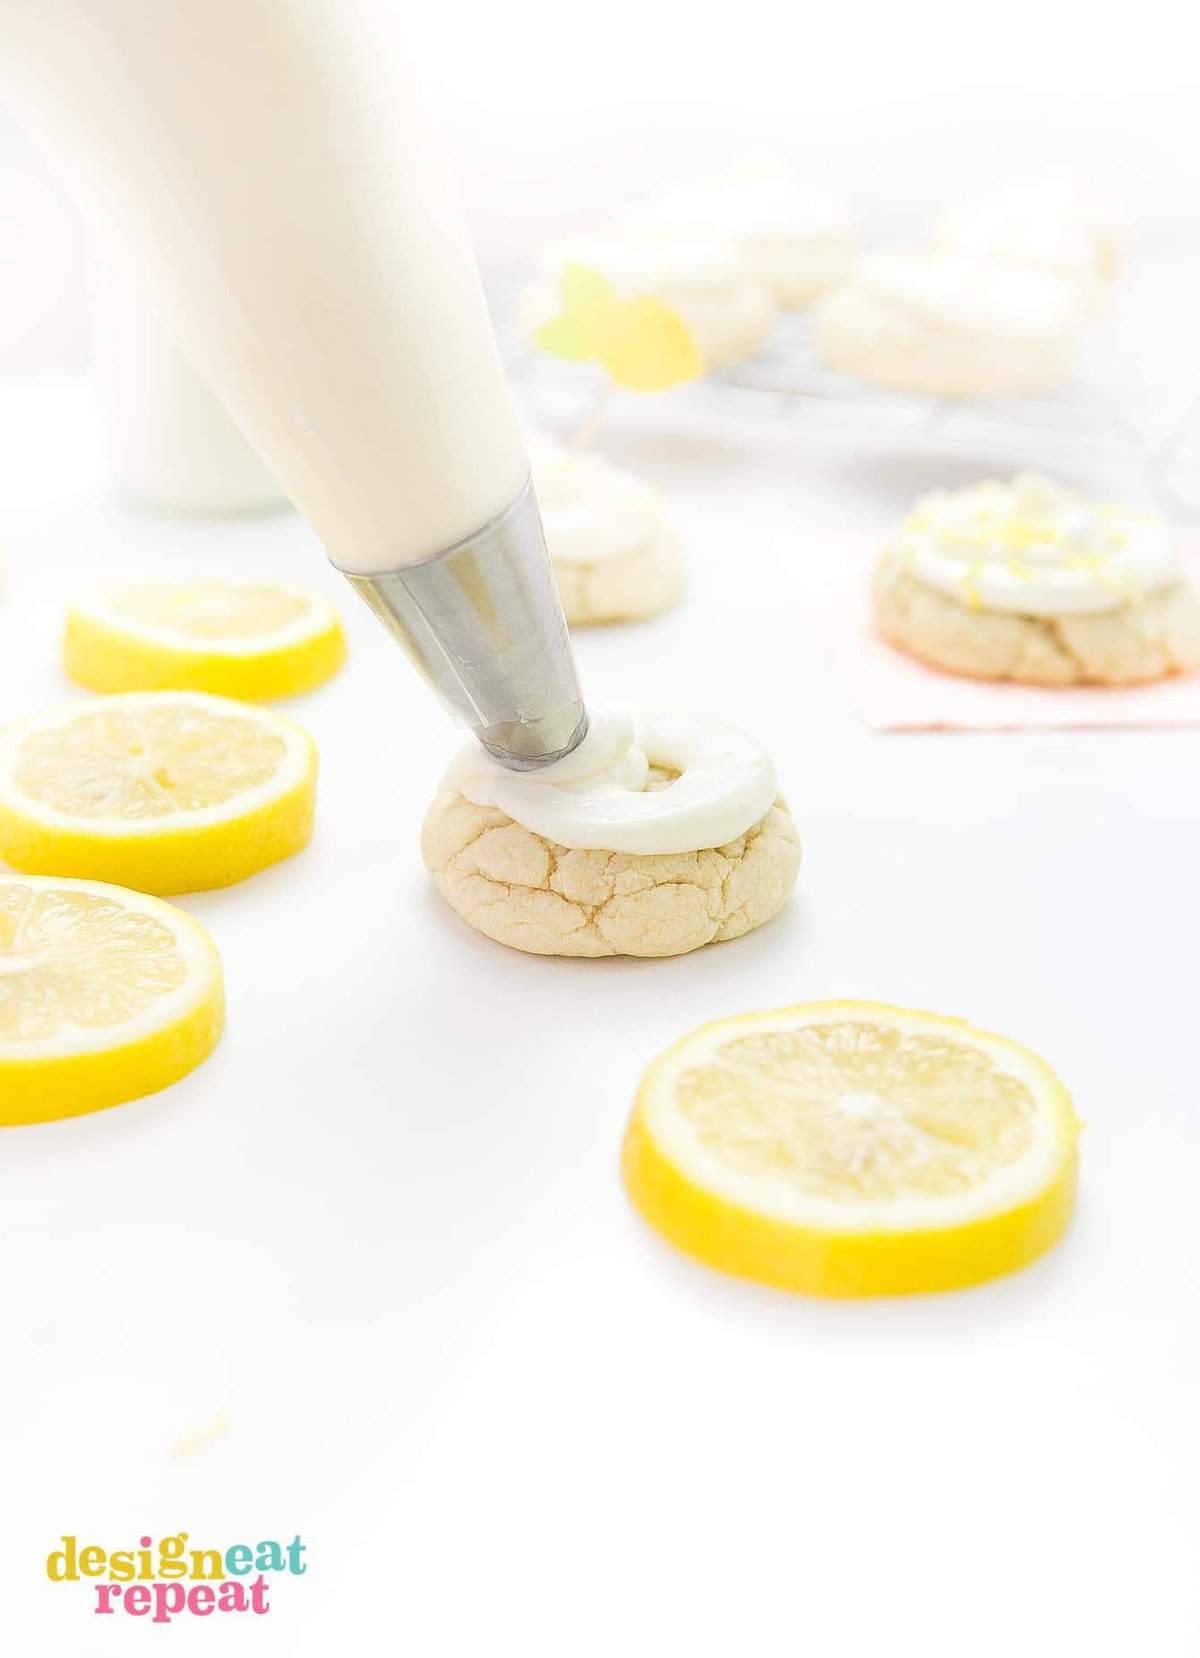 Piping bag and tip piping cream cheese frosting onto thick lemon sugar cookie.